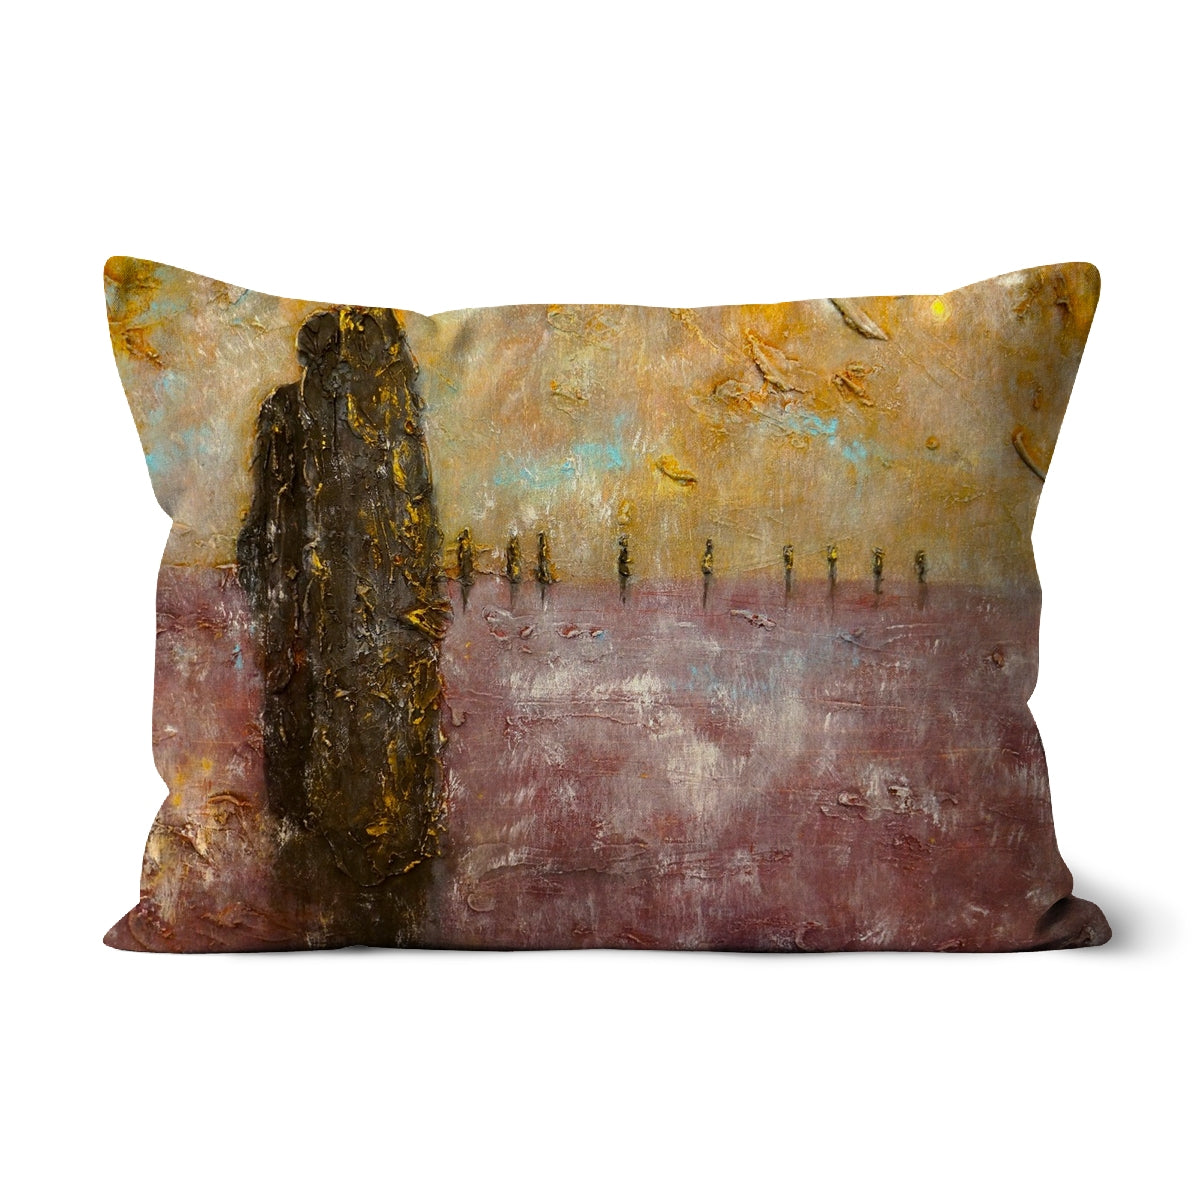 Bordgar Mist Orkney Art Gifts Cushion-Cushions-Orkney Art Gallery-Faux Suede-19"x13"-Paintings, Prints, Homeware, Art Gifts From Scotland By Scottish Artist Kevin Hunter